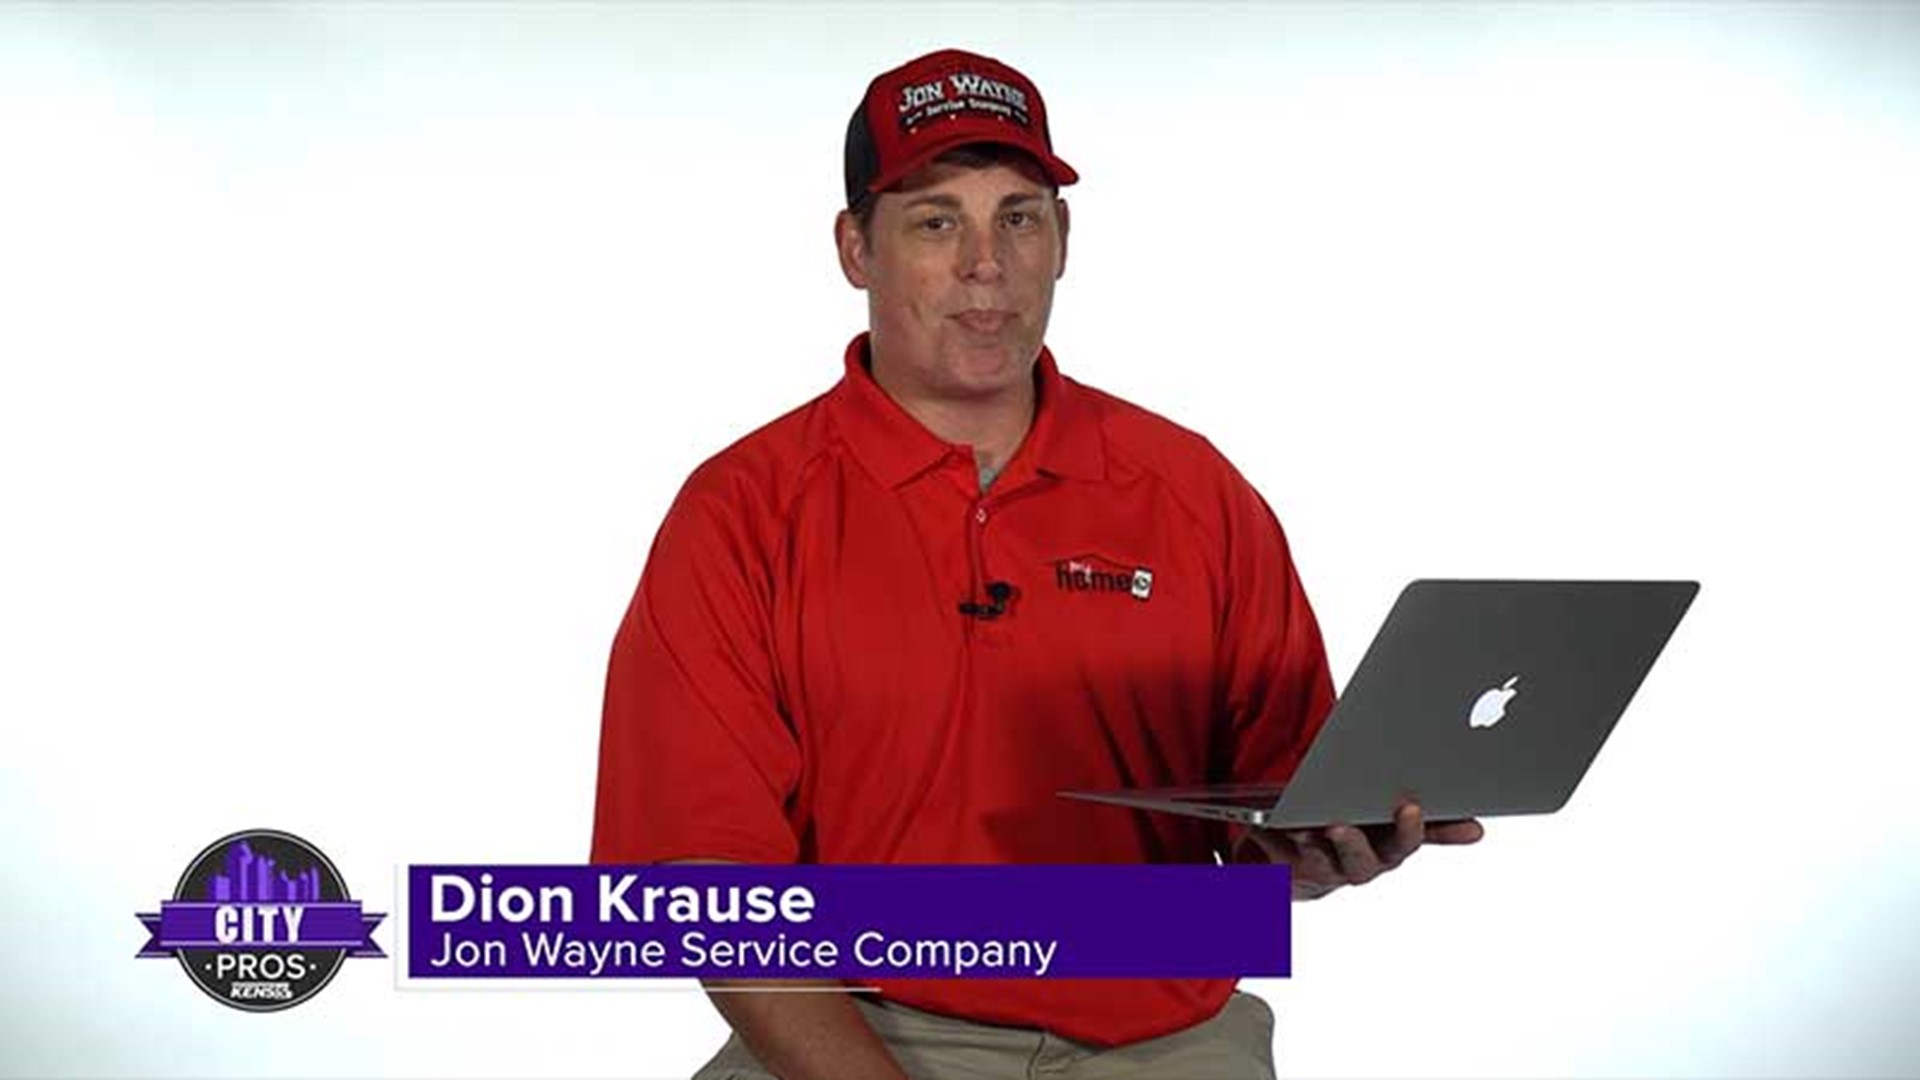 Dion Krause from Jon Wayne Service Company answers your Smart Home system questions. You can learn more about the system at JonWayne.com.